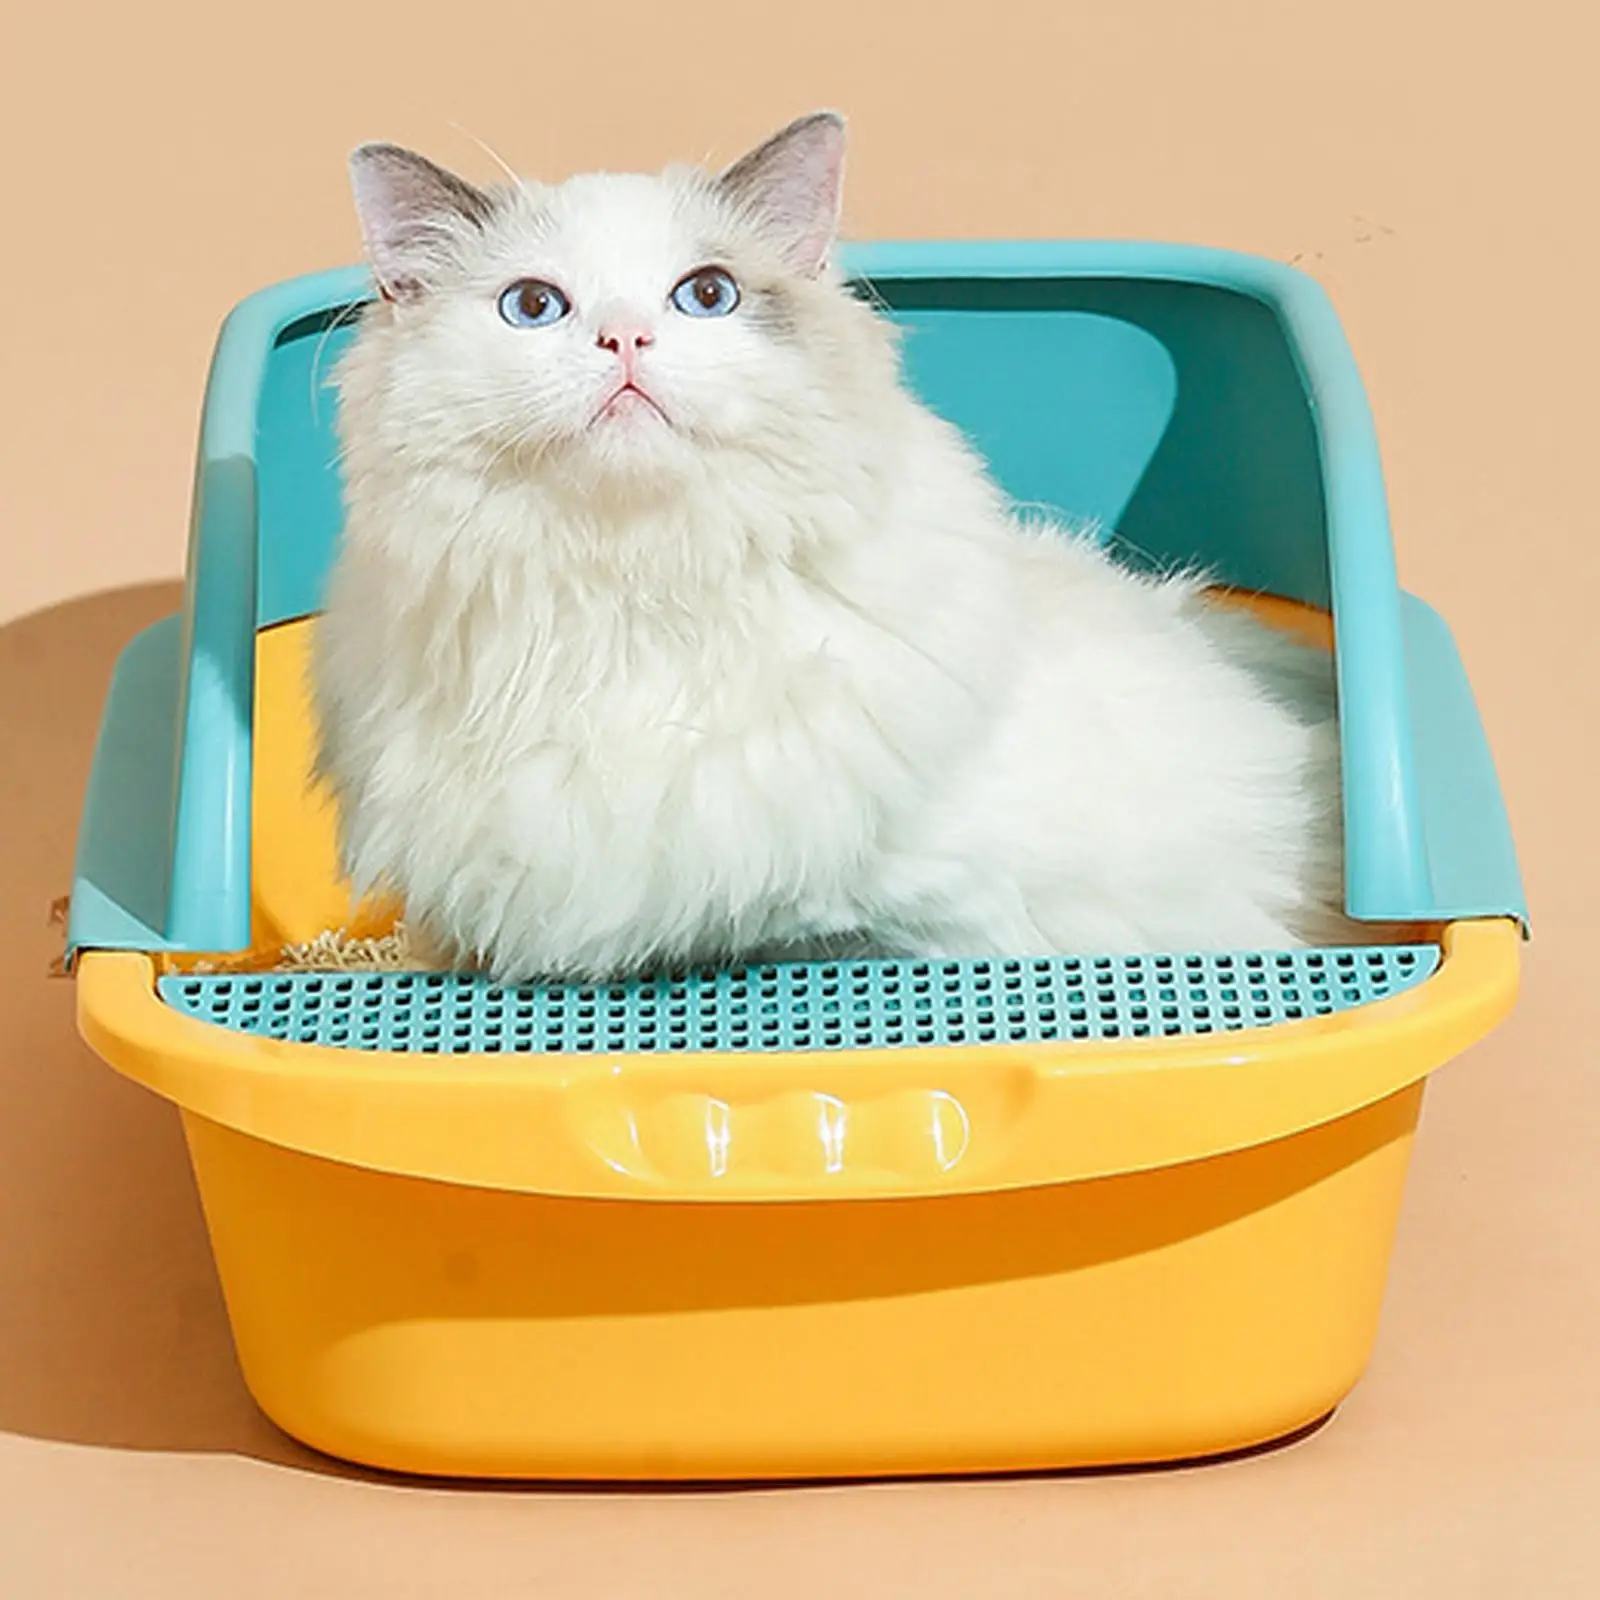 Toilet High Sided Rim Portable Bedpan Dog Tray Cat Litter Box for Small Animals Travel